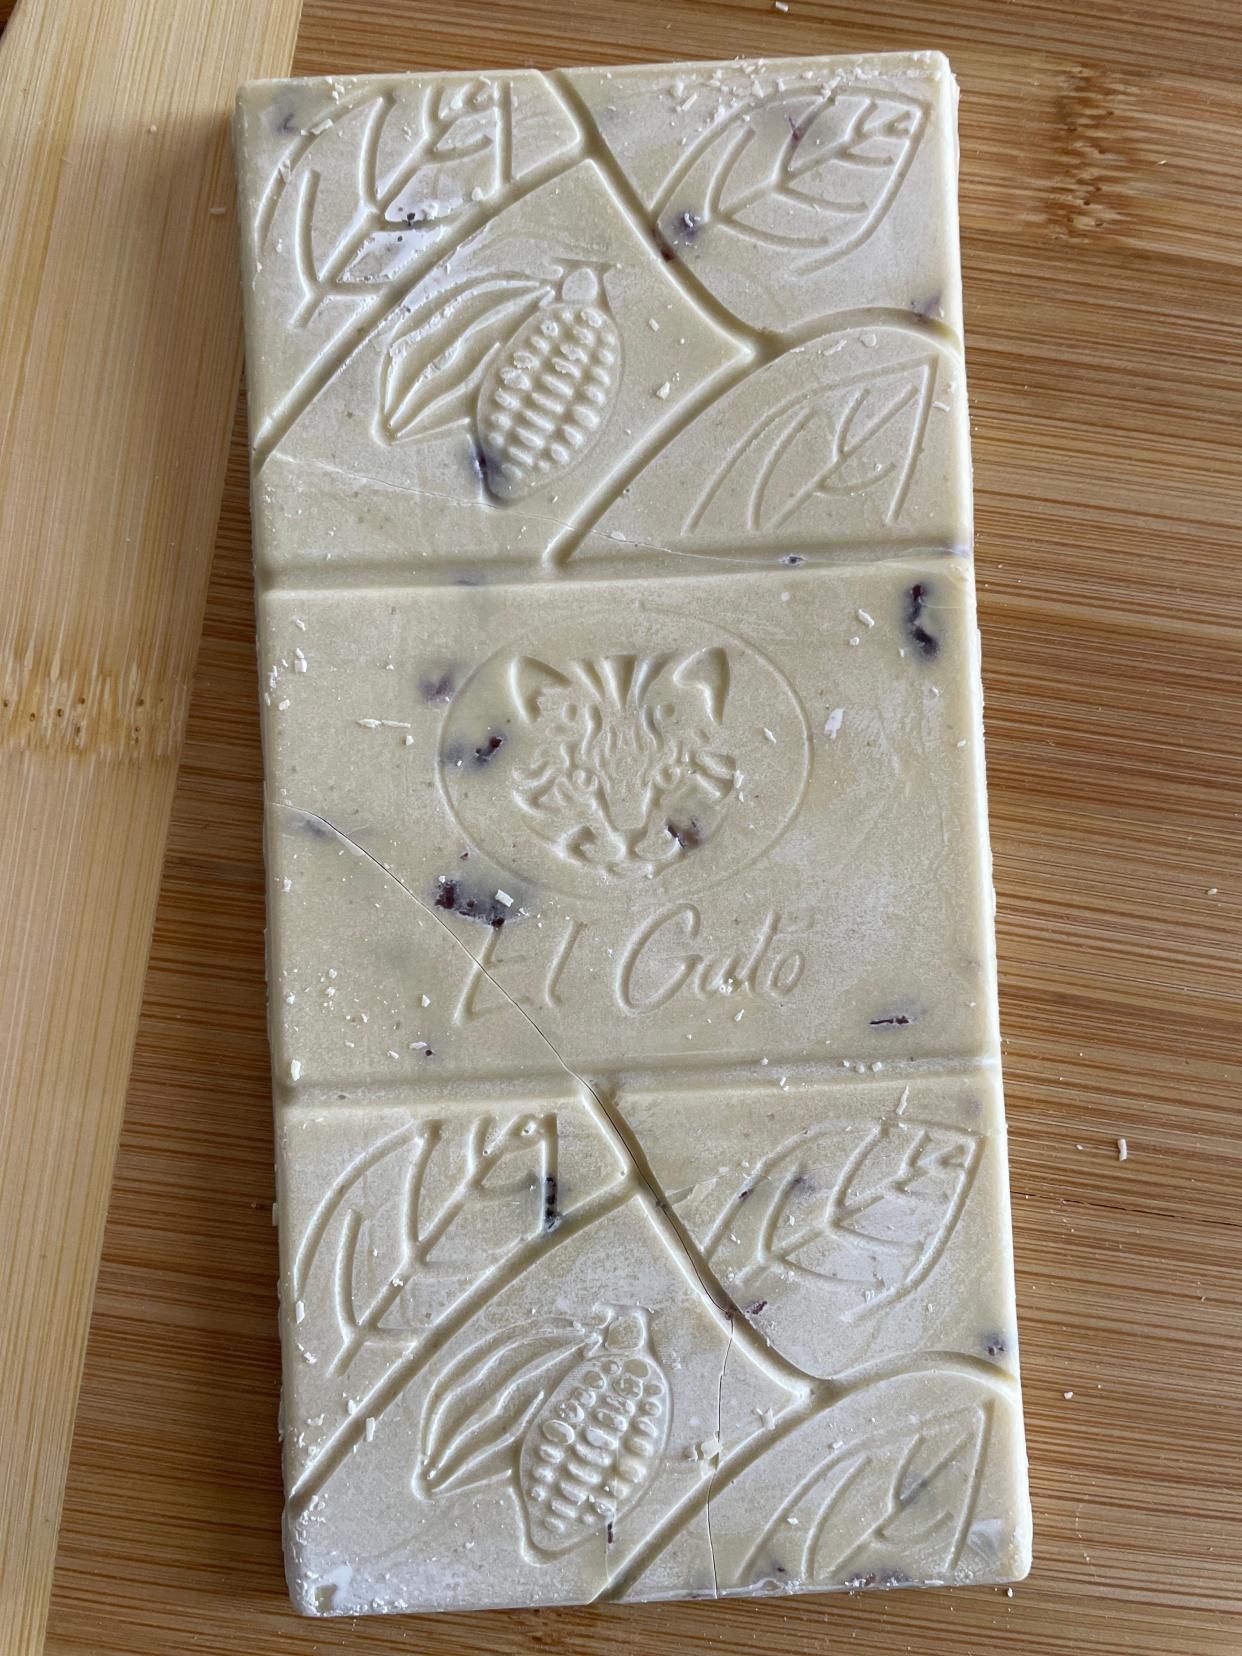 El Gato Chocolate's white chocolate with blueberries is made with cacao butter, powdered milk, panela and dried blueberries. Like all of the company's bars, it's imprinted with the image of an endangered wildcat.